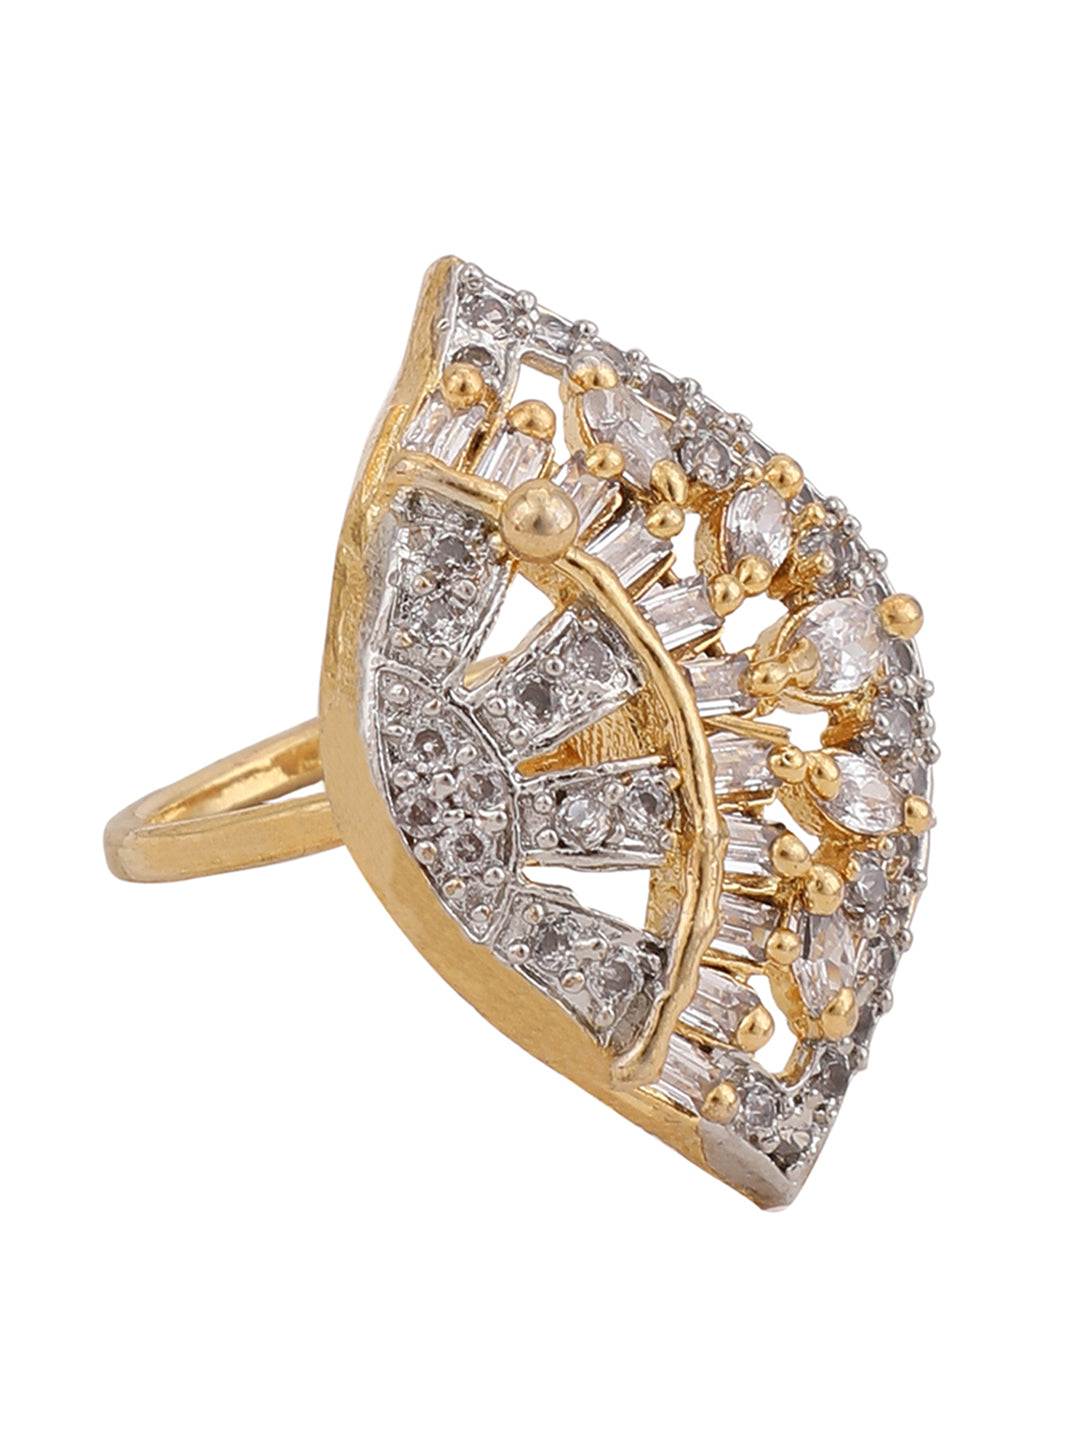 Women's Gold Plated White American Diamond Studded Adjustable Cocktail Ring - Anikas Creation